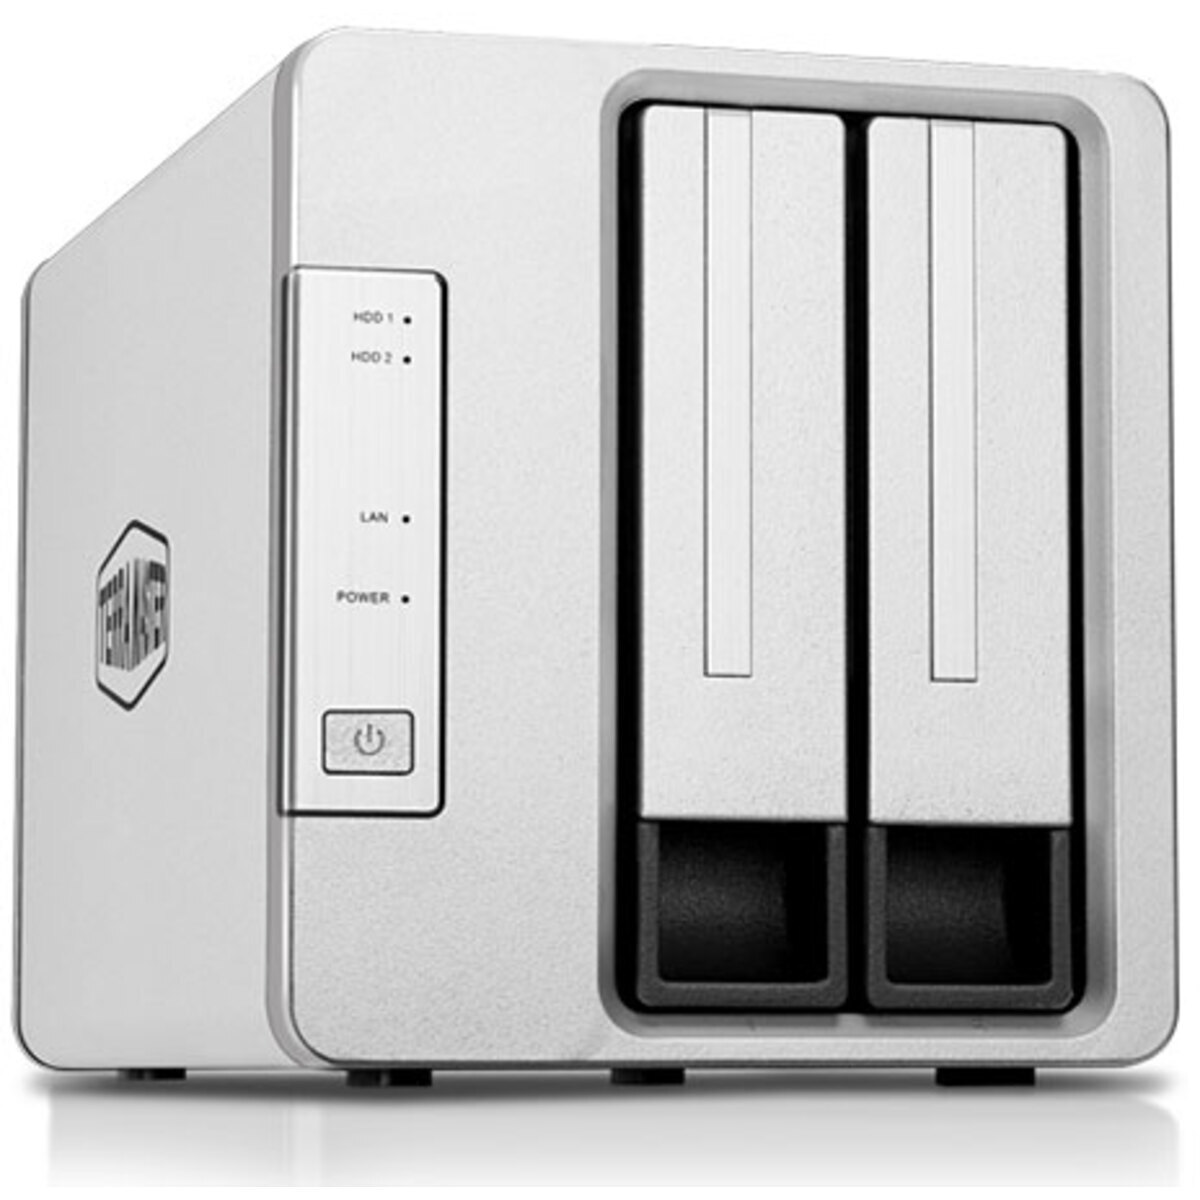 TerraMaster F2-223 2tb 2-Bay Desktop Personal / Basic Home / Small Office NAS - Network Attached Storage Device 1x2tb Seagate BarraCuda ST2000DM008 3.5 7200rpm SATA 6Gb/s HDD CONSUMER Class Drives Installed - Burn-In Tested - FREE RAM UPGRADE F2-223